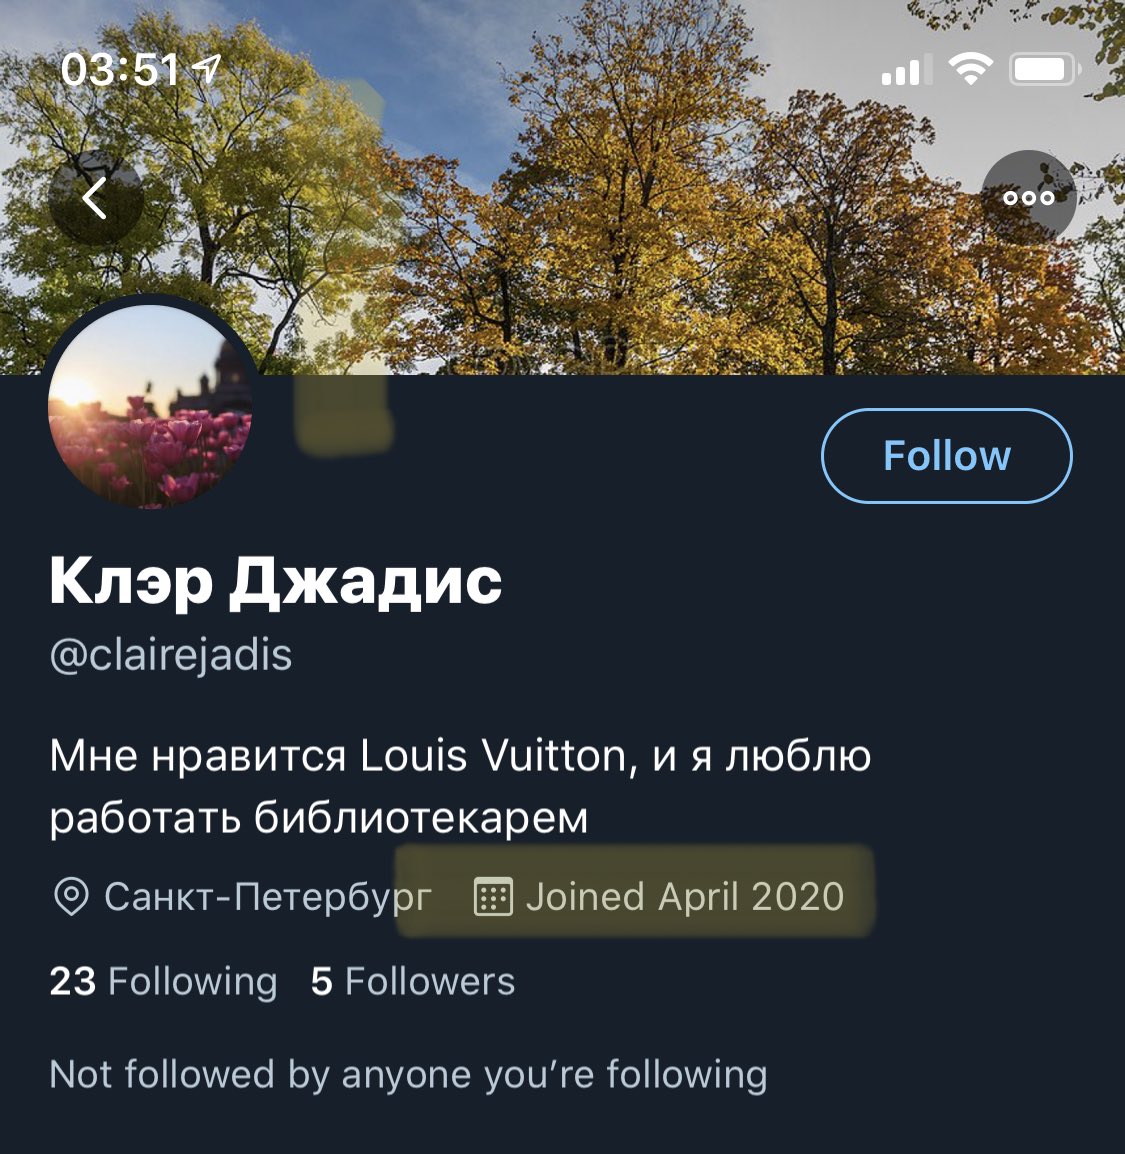 Then as if by magic on the same day, a Russian account with the exact same handle appears on Twitter. So it doesn’t take a rocket scientist to work out who set this account up, and it wasn’t a Russian. 4/